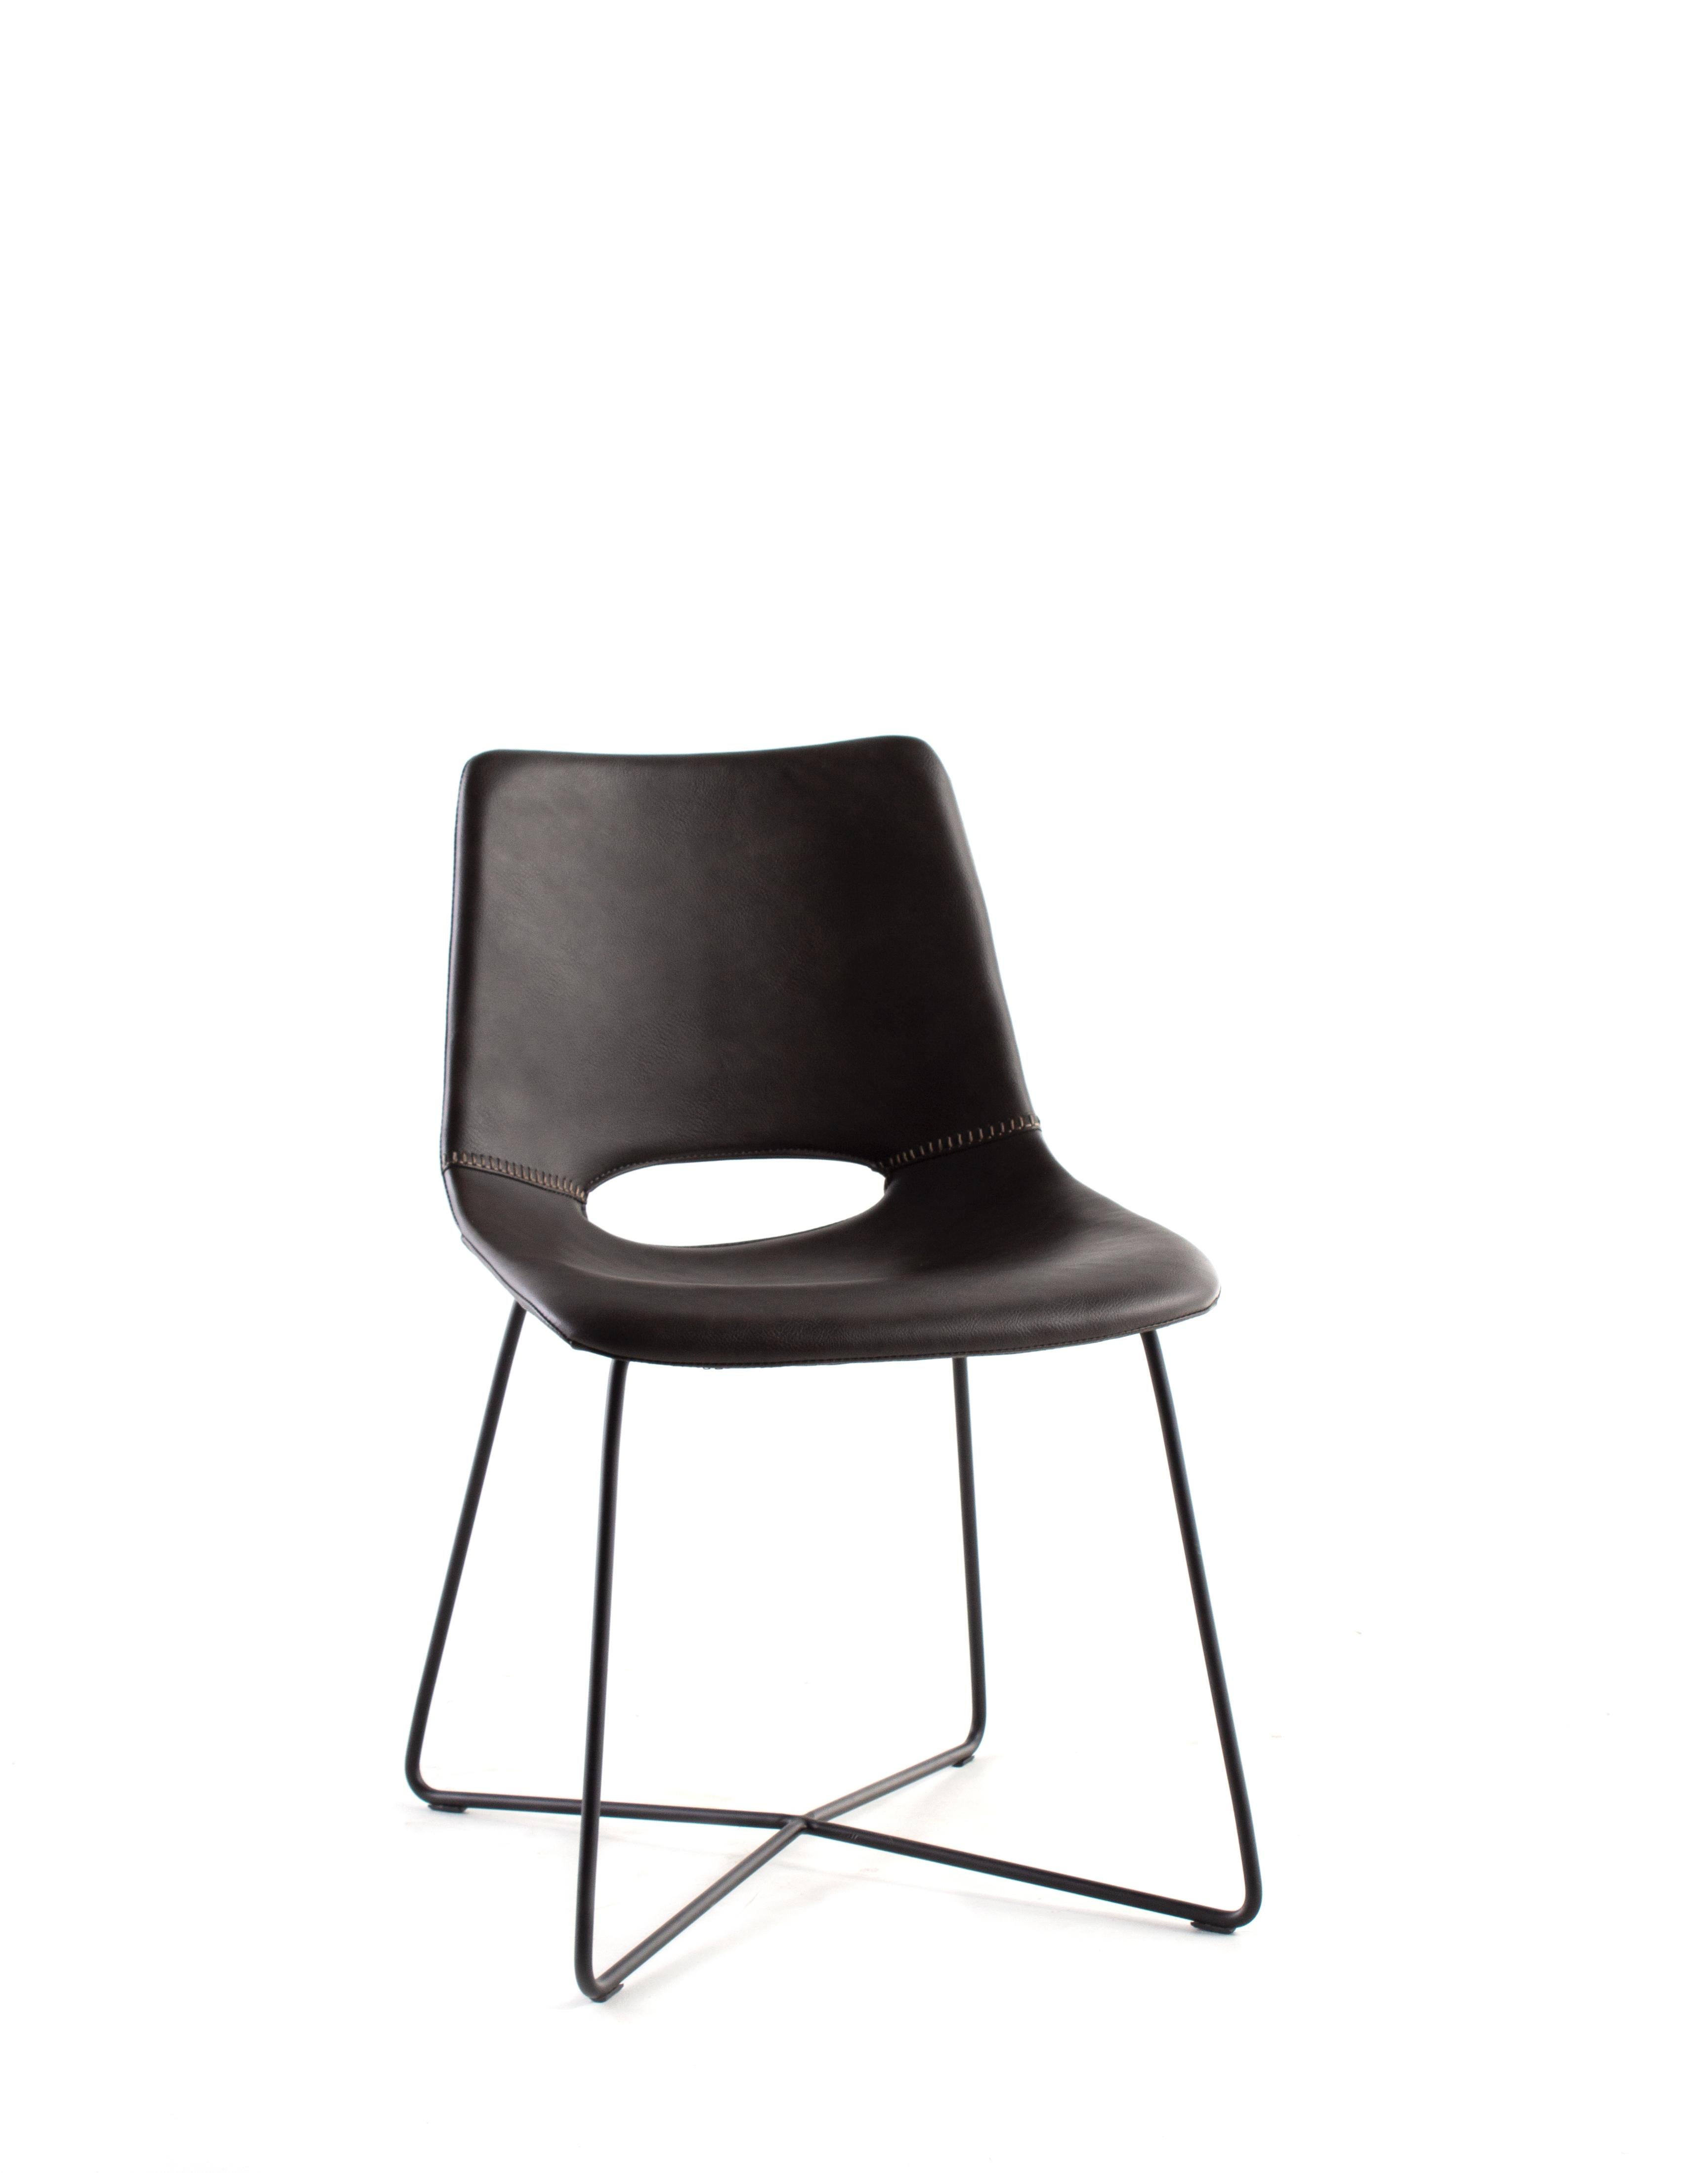 Modern dark seaweed-toned leather dining chair with black steel legs.

This piece is a part of Brendan Bass’s one-of-a-kind collection, Le Monde. French for “The World”, the Le Monde collection is made up of rare and hard to find pieces curated by